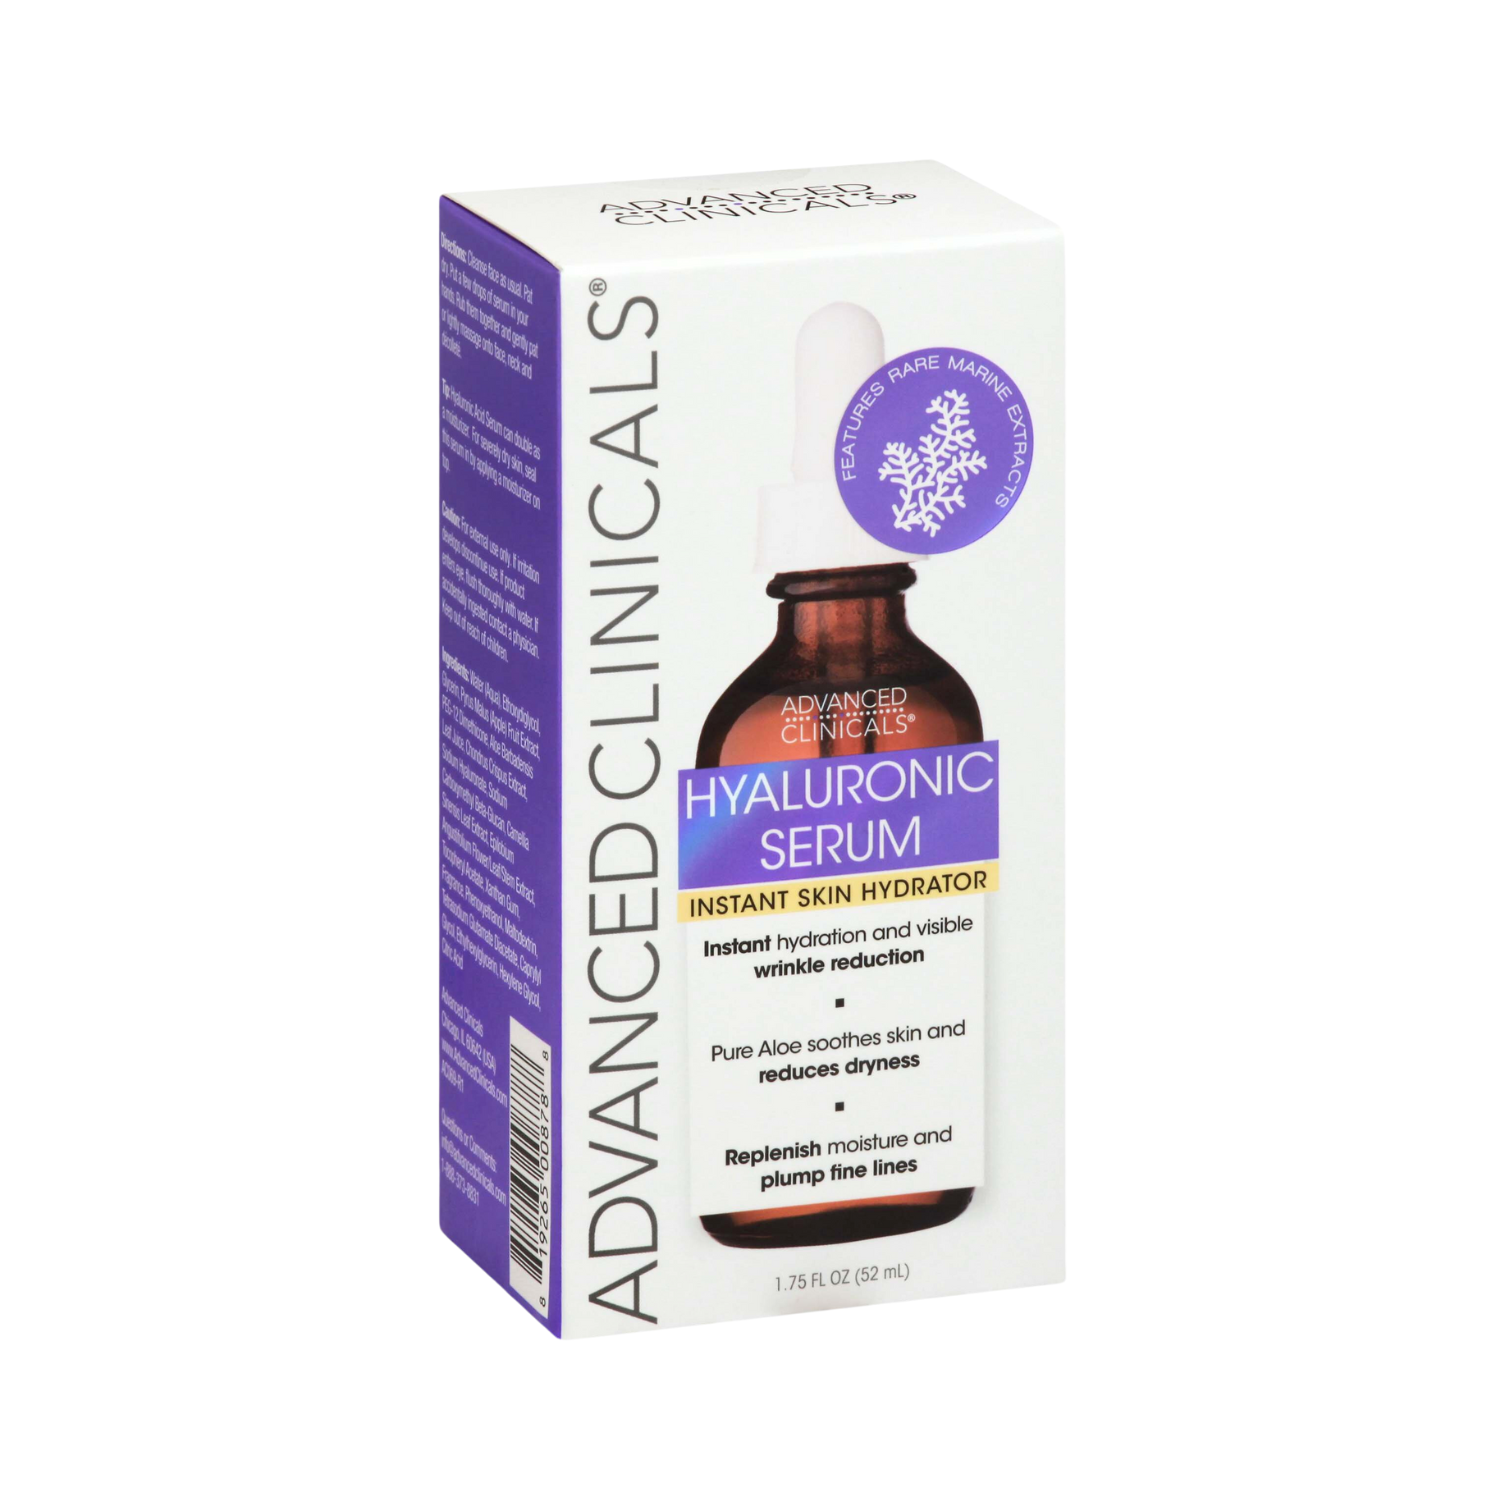 advanced-clinicals-hyaluronic-face-serum-52ml